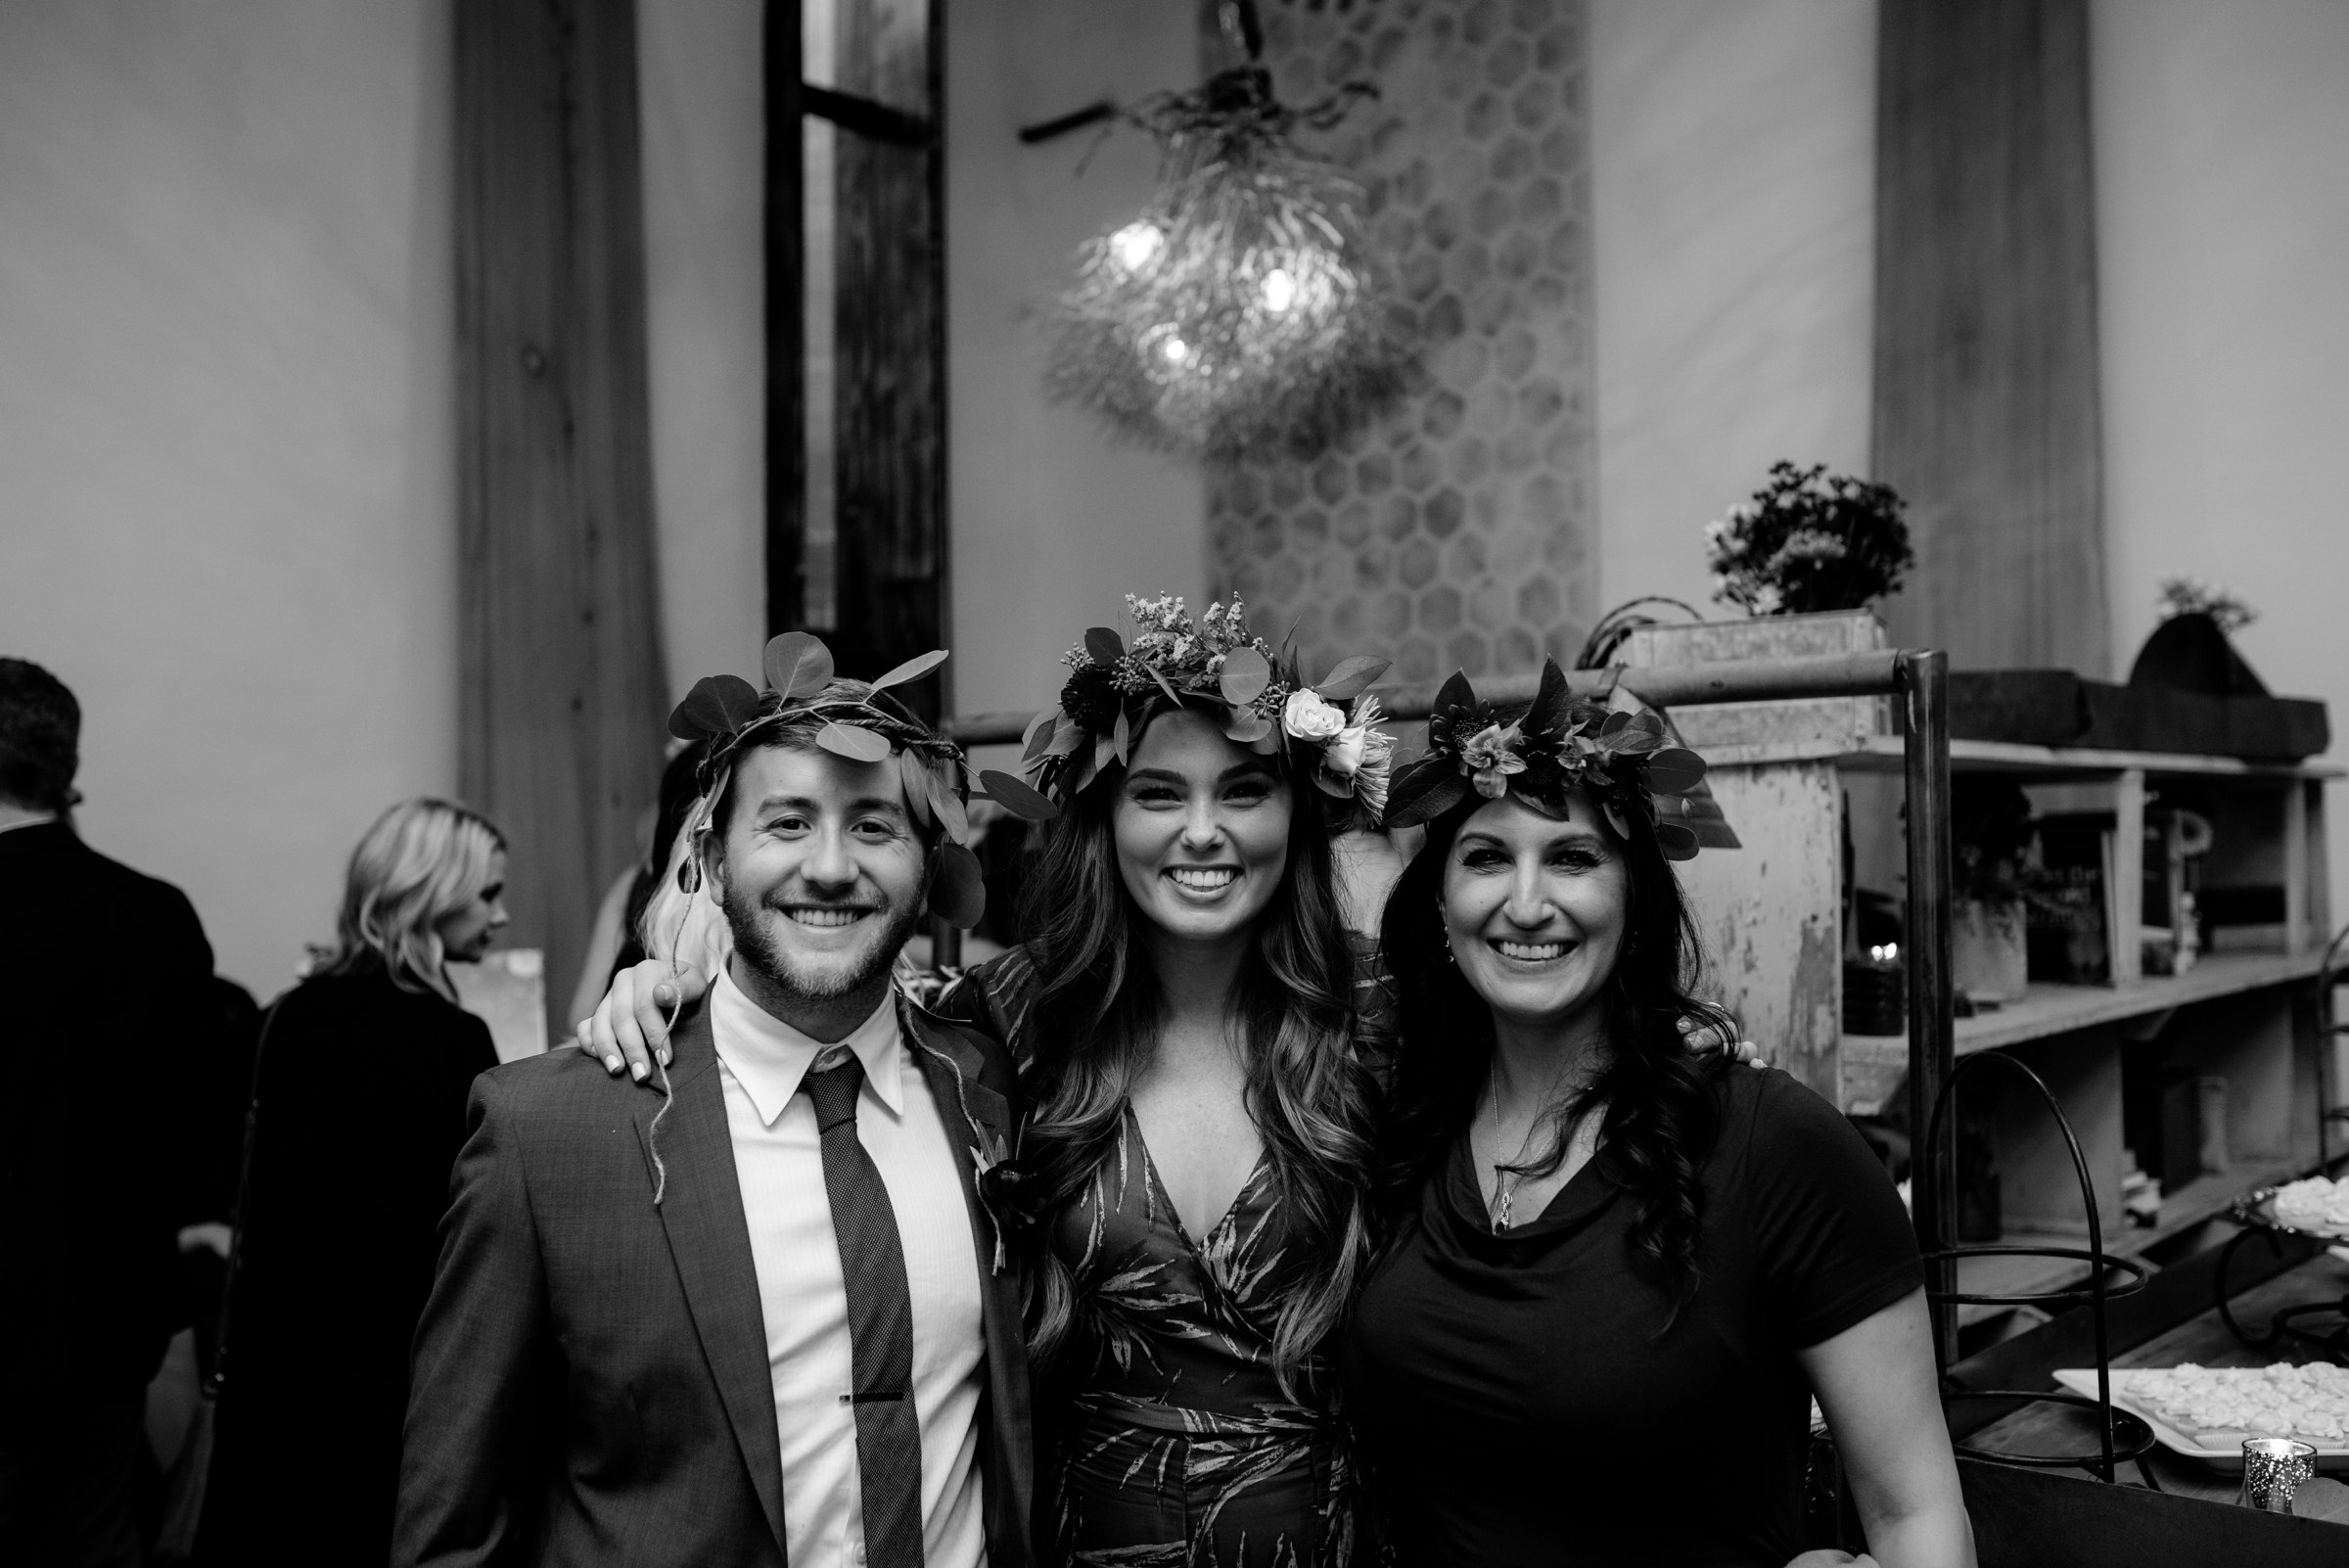  guests posing wearing flower crowns wedding vuka collective austin texas 